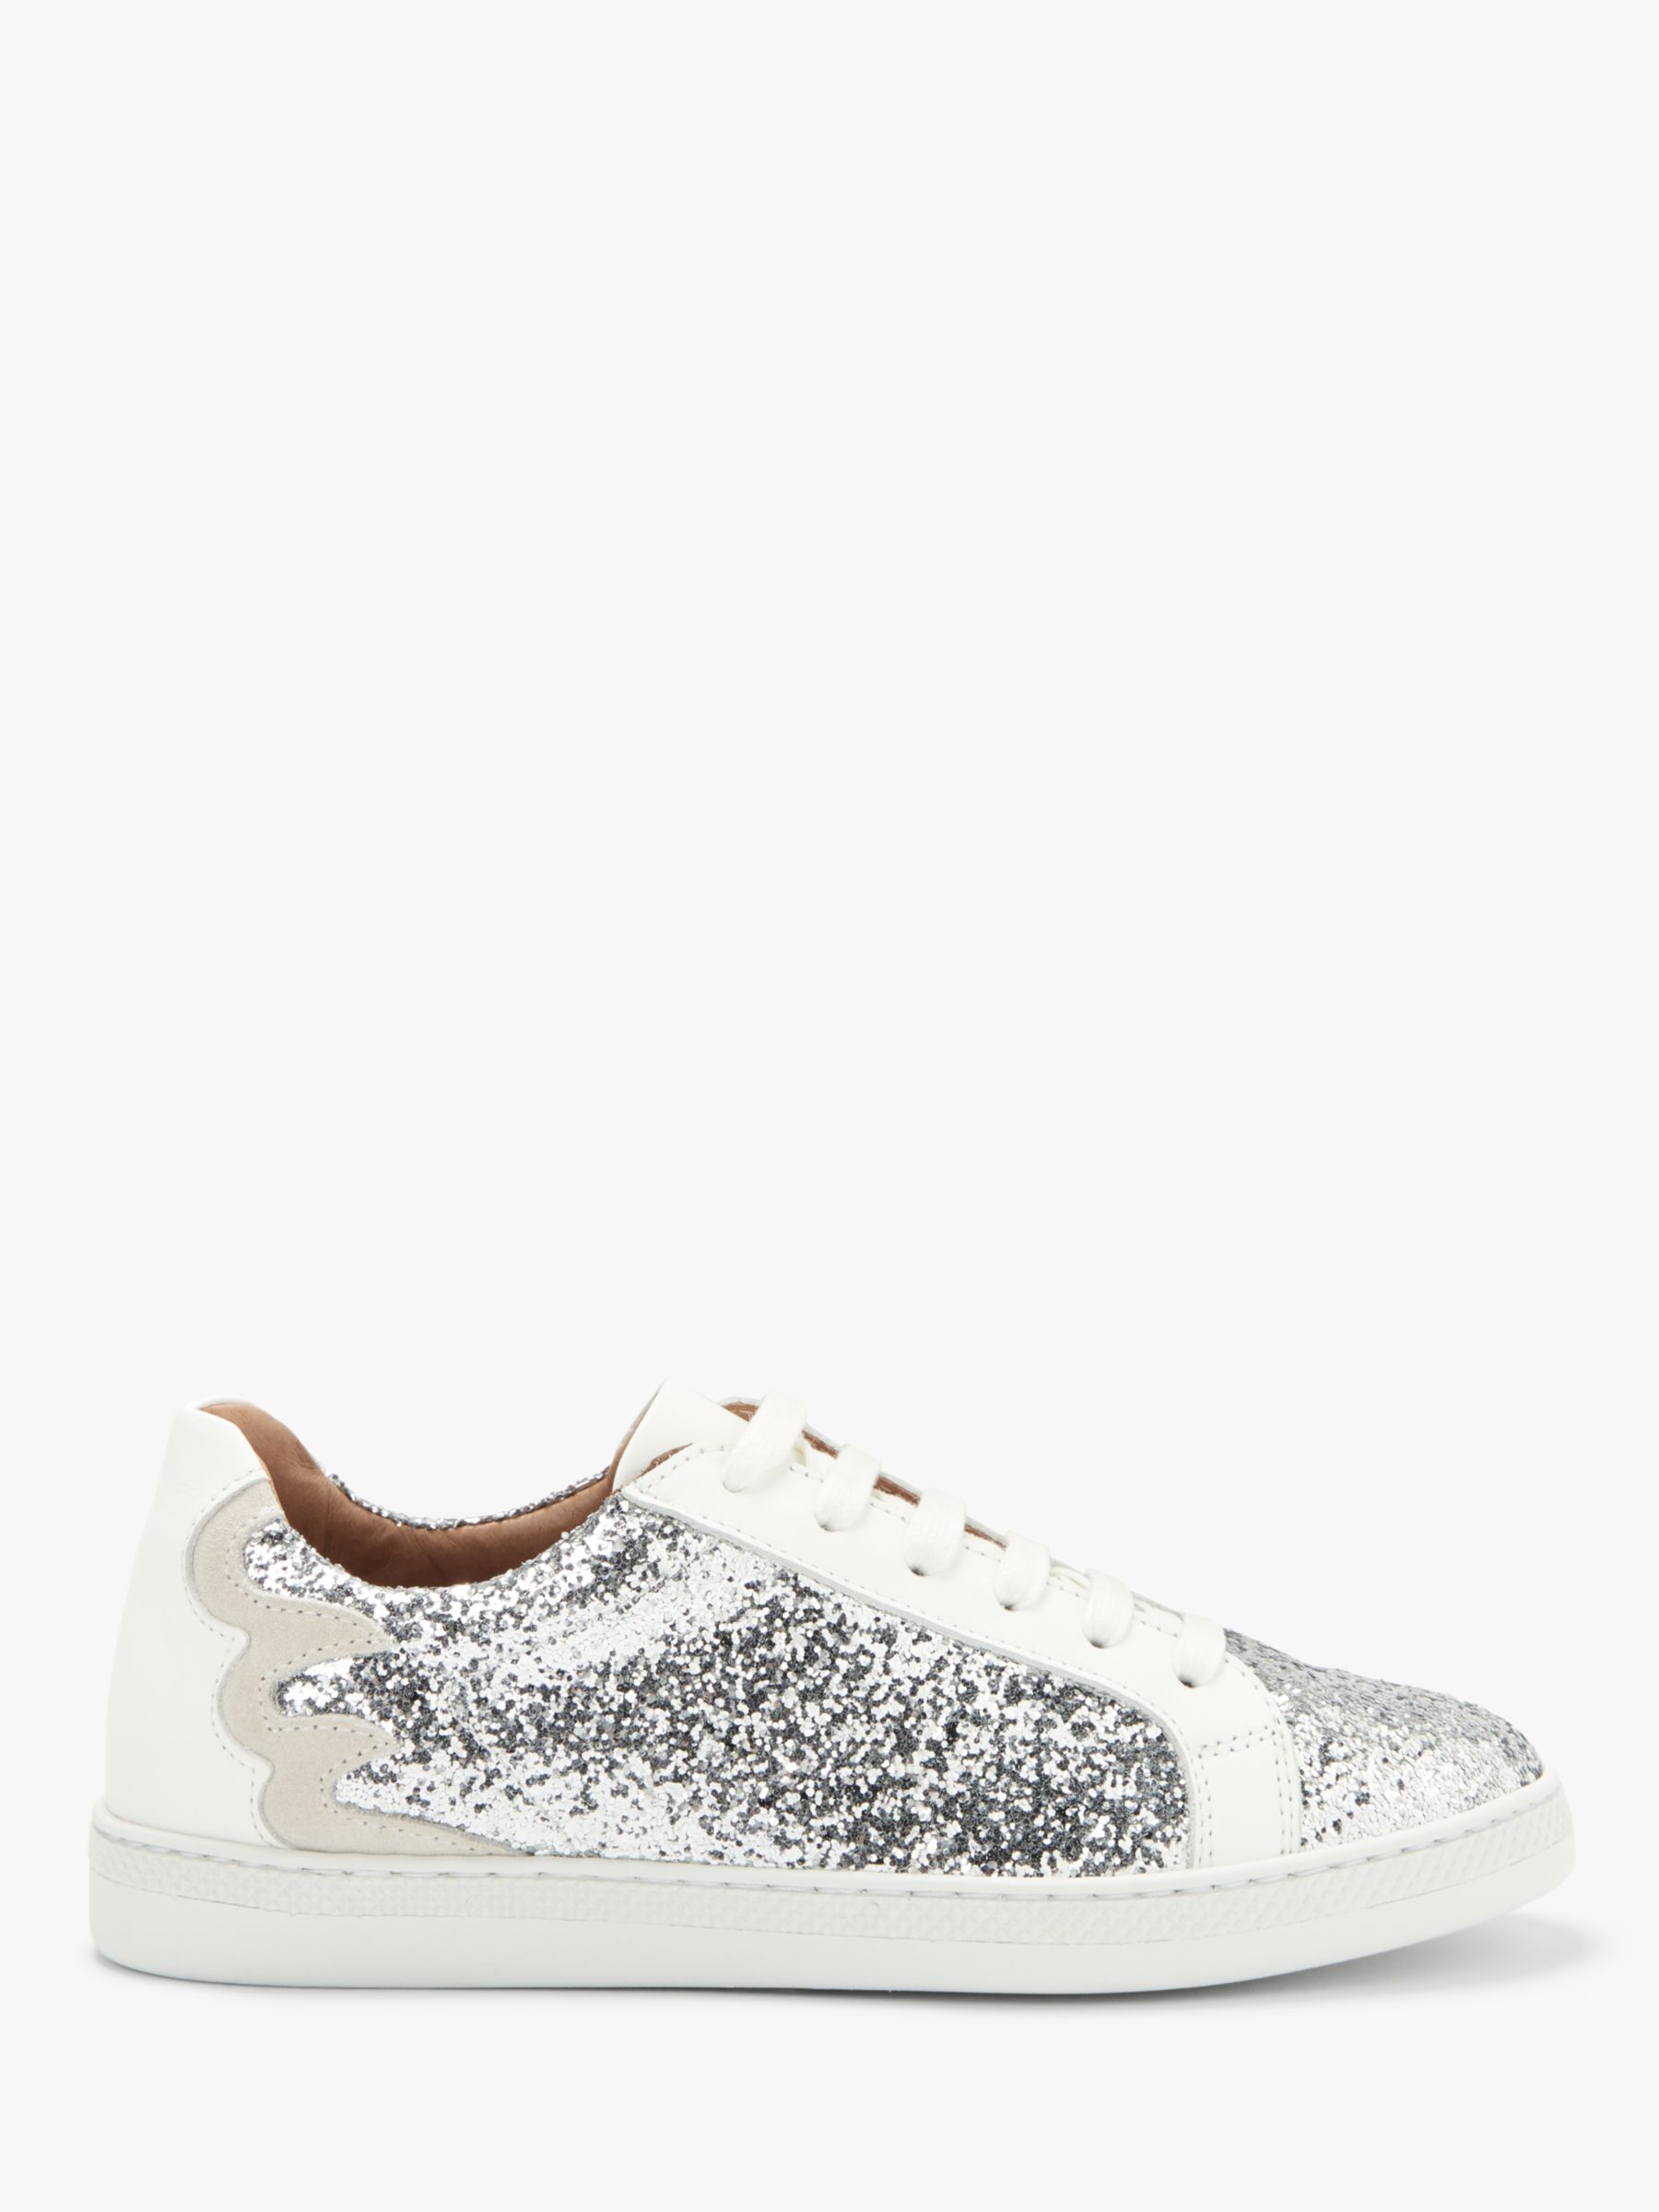 AND/OR Elsie Glitter Trainers, Silver Leather